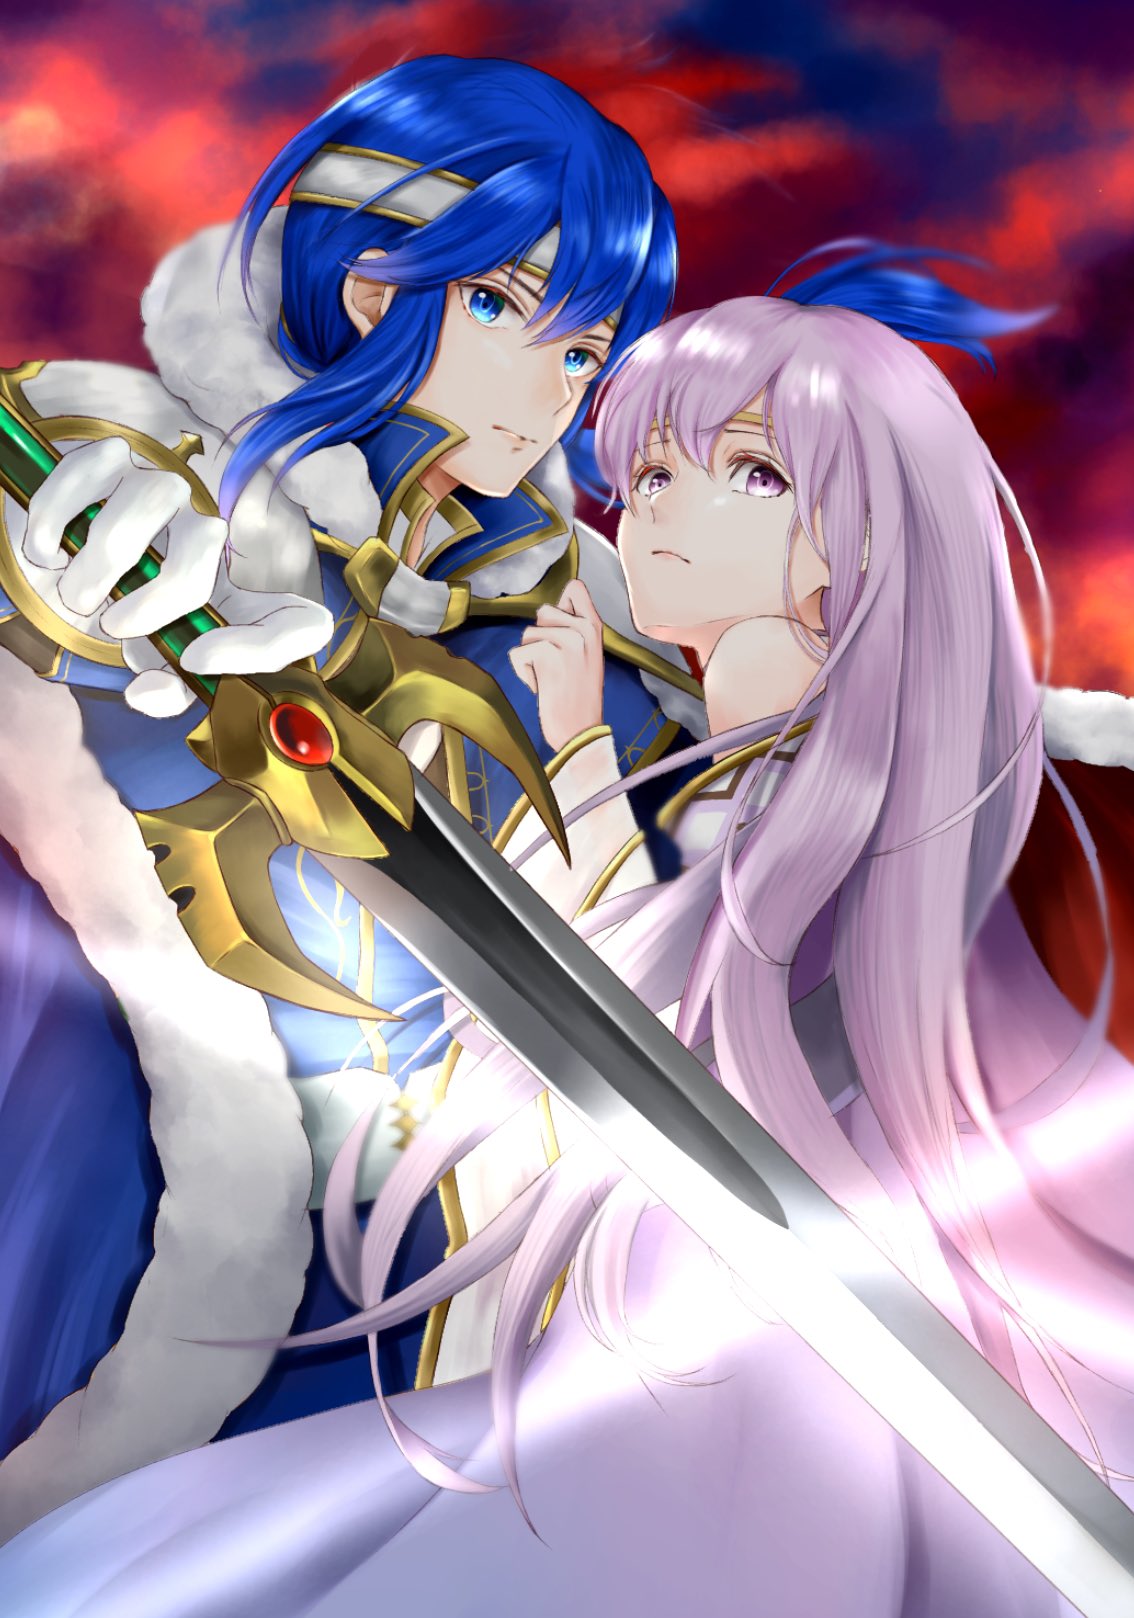 1boy 1girl aplche blue_eyes blue_hair brother_and_sister cape circlet dress fire_emblem fire_emblem:_genealogy_of_the_holy_war fur_trim headband highres holding holding_weapon julia_(fire_emblem) long_hair looking_at_viewer ponytail purple_hair seliph_(fire_emblem) siblings sword tyrfing_(fire_emblem) violet_eyes weapon white_headband